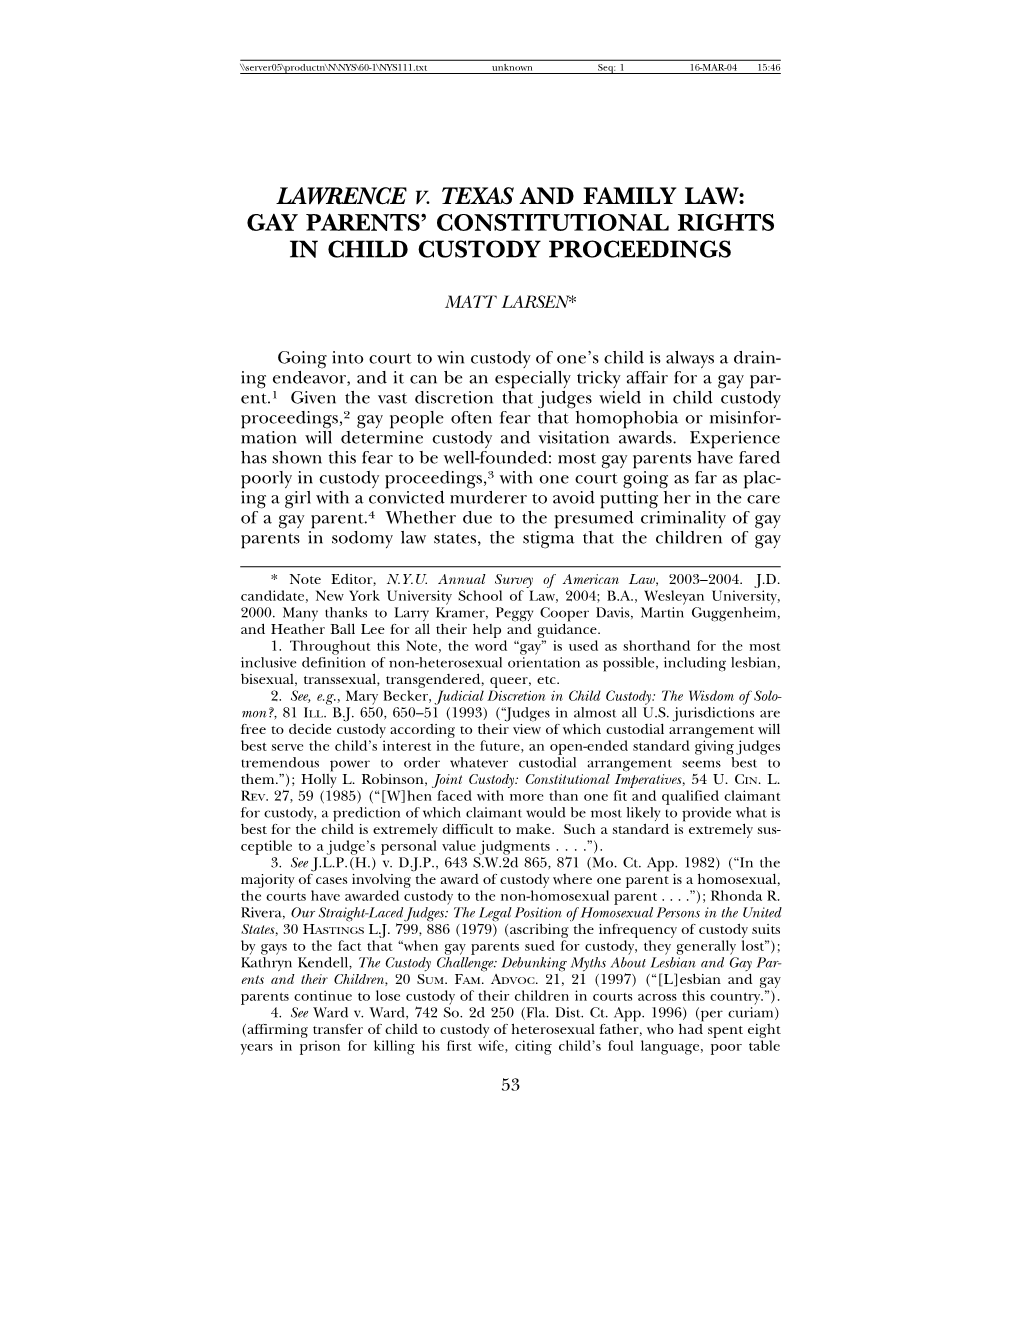 Lawrence V. Texas and Family Law: Gay Parents’ Constitutional Rights in Child Custody Proceedings